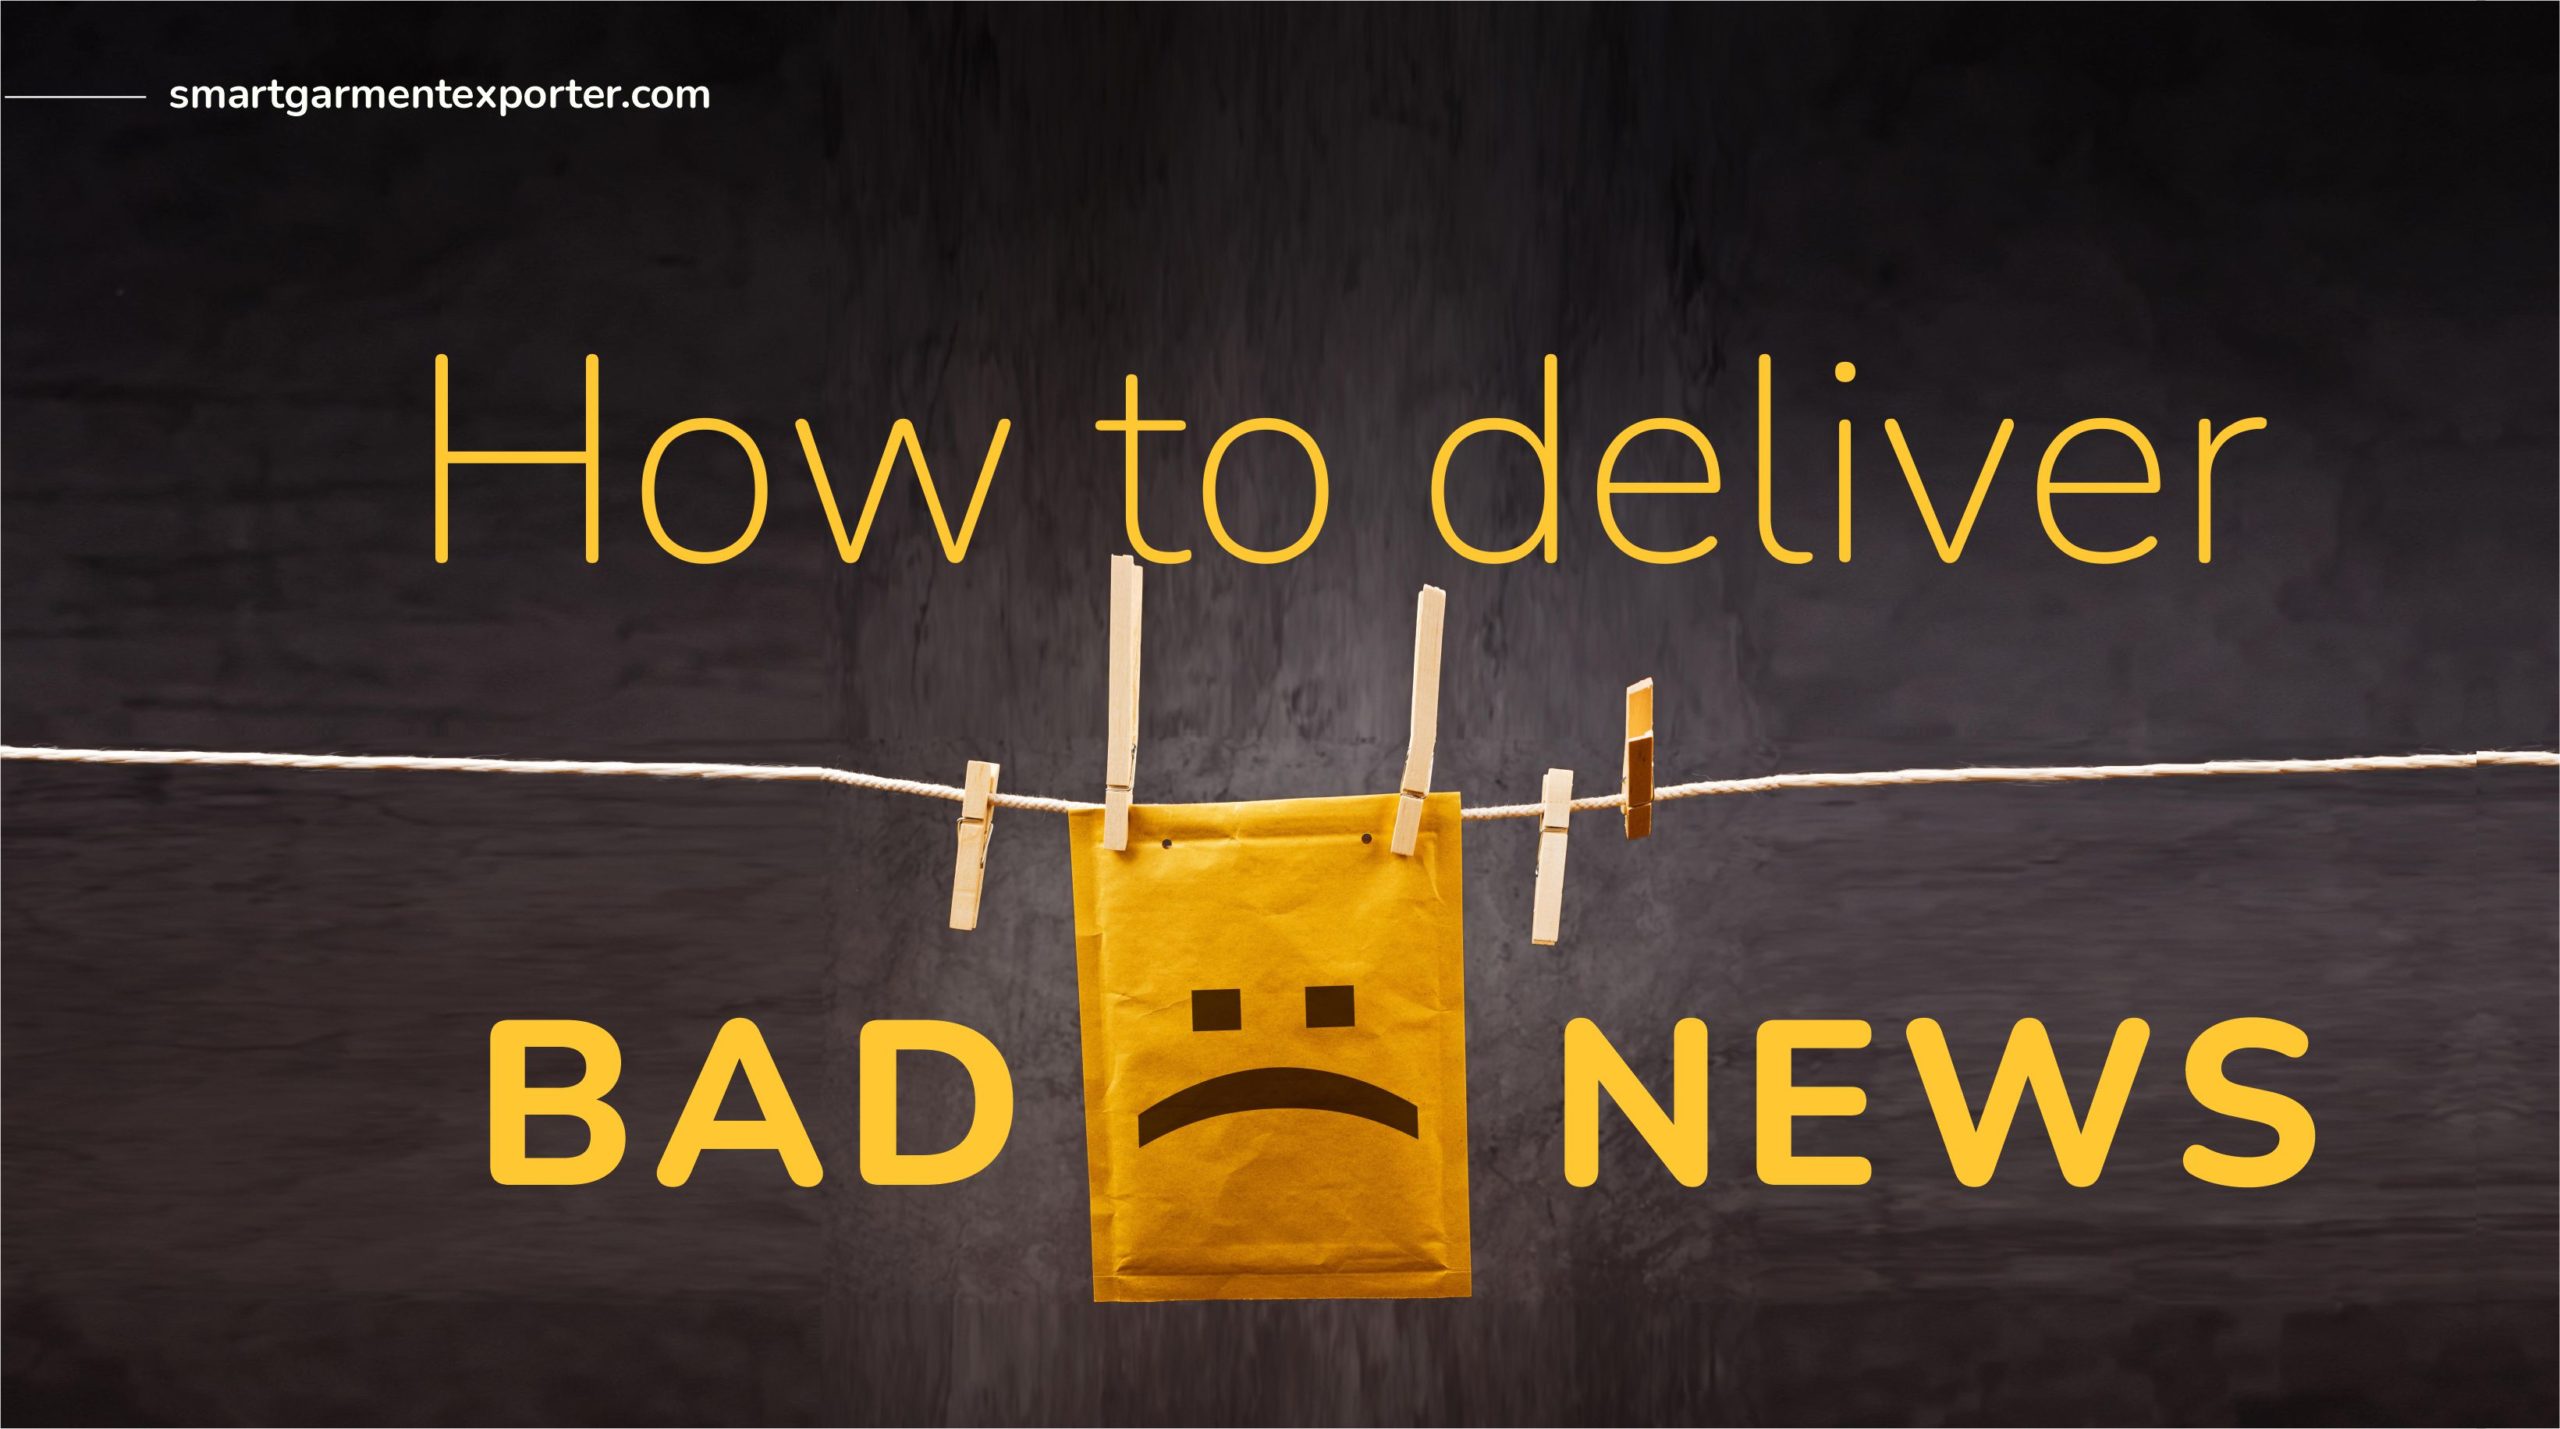 The powerful Still-Connected-Formula: How to deliver bad news – like a request for an extension of time to deliver goods for garment buyers